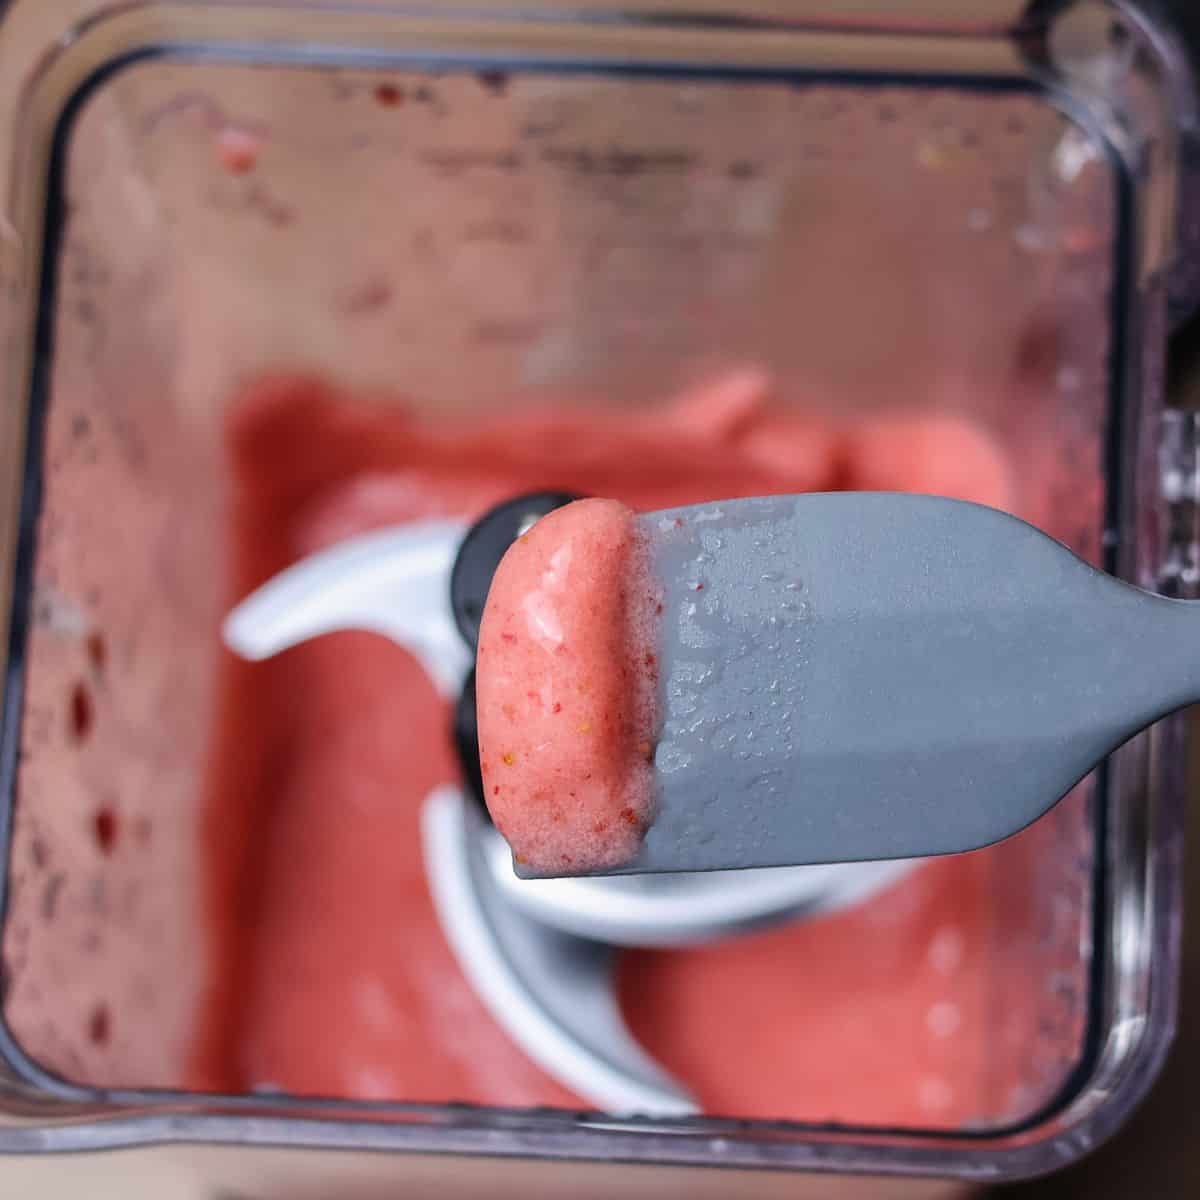 Close-up of a blender’s blade with a dollop of thick strawberry banana smoothie on a spatula, showing the creamy texture.